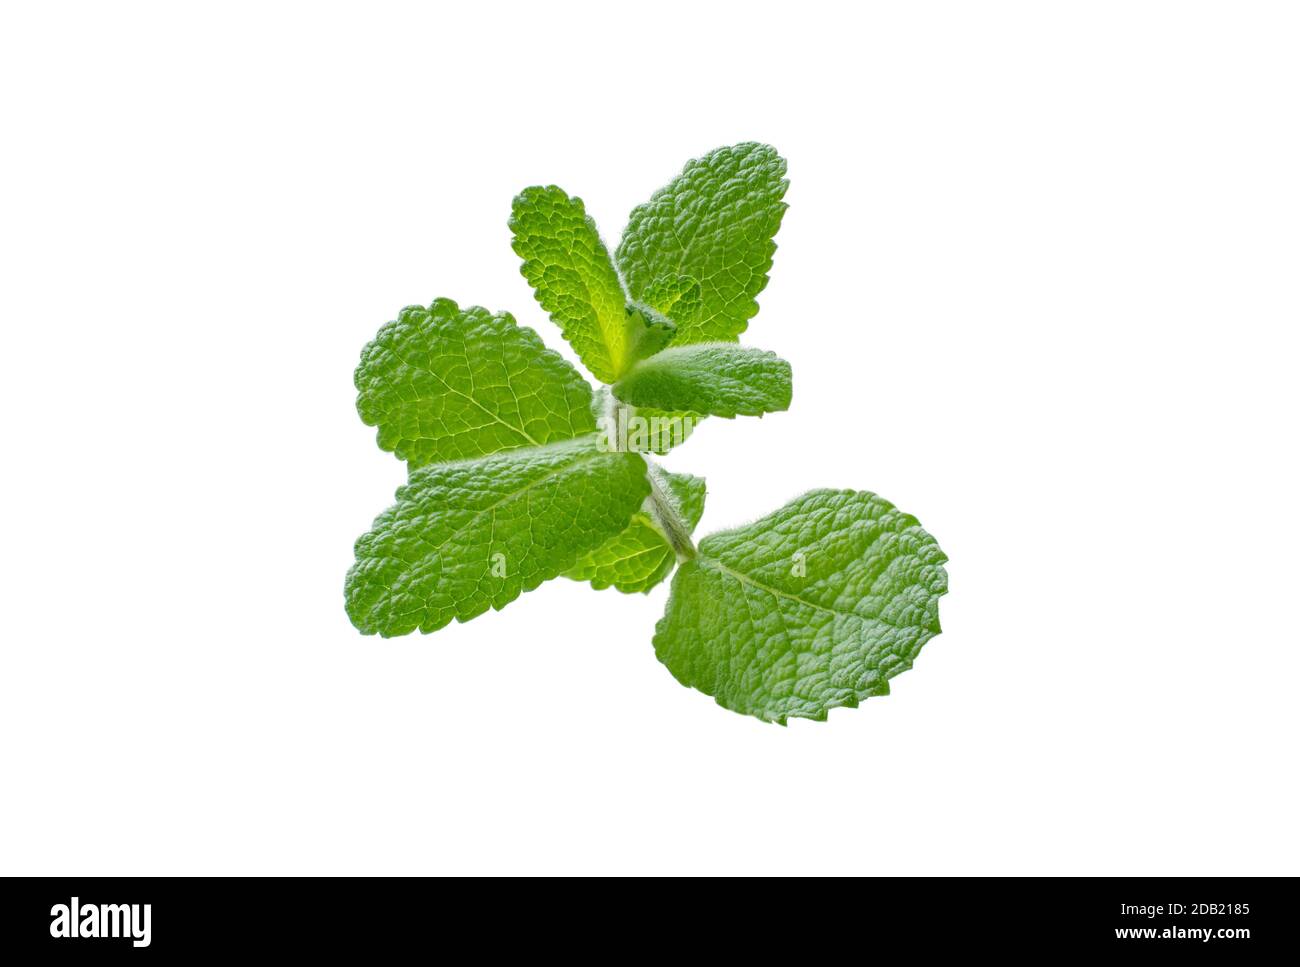 Mint branch isolated on white. Mentha or peppermint downy leaves. Stock Photo